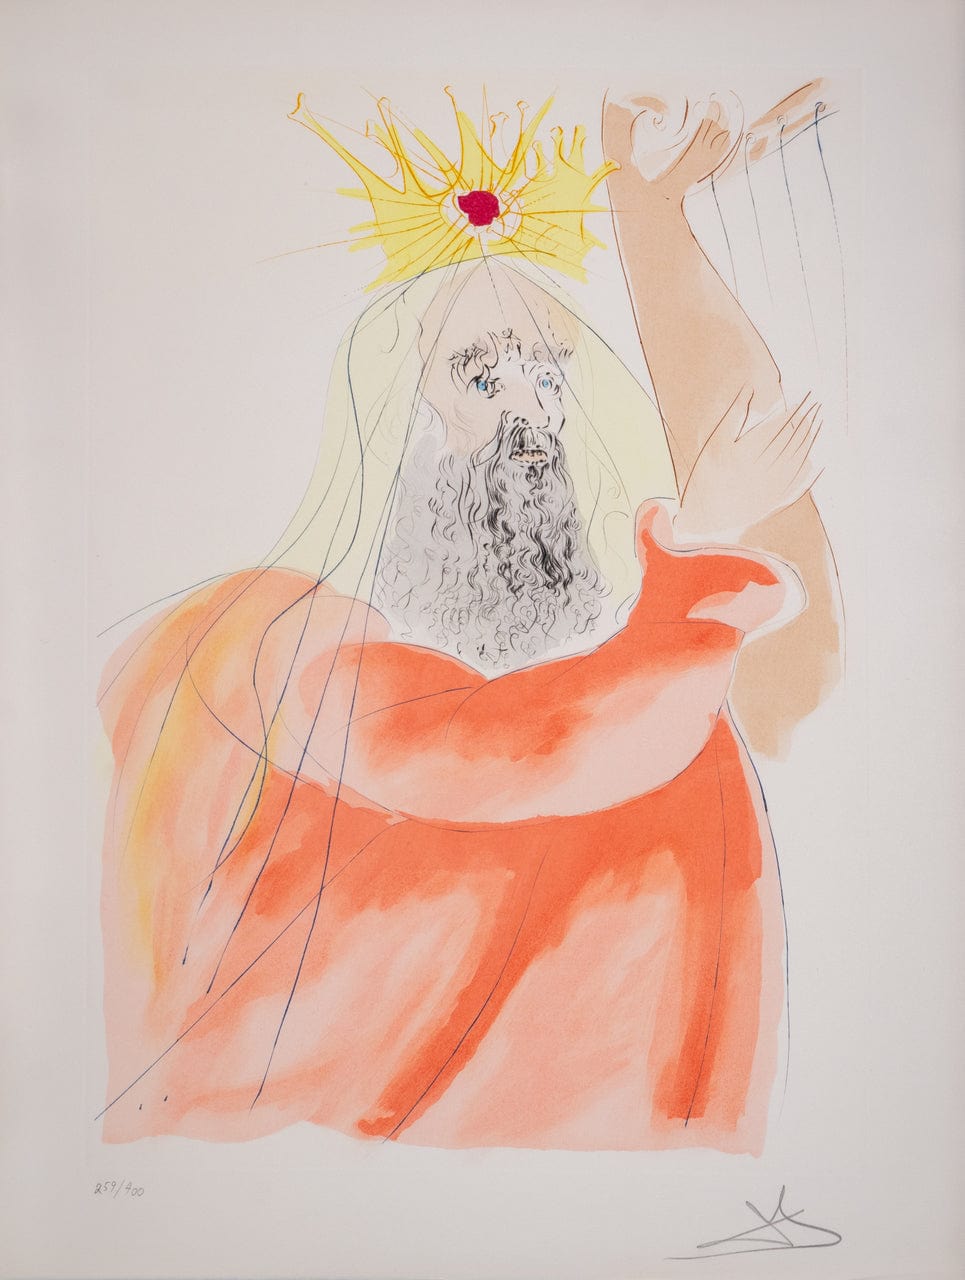 Salvador Dali; "King David " from Our Historical Heritage (1)